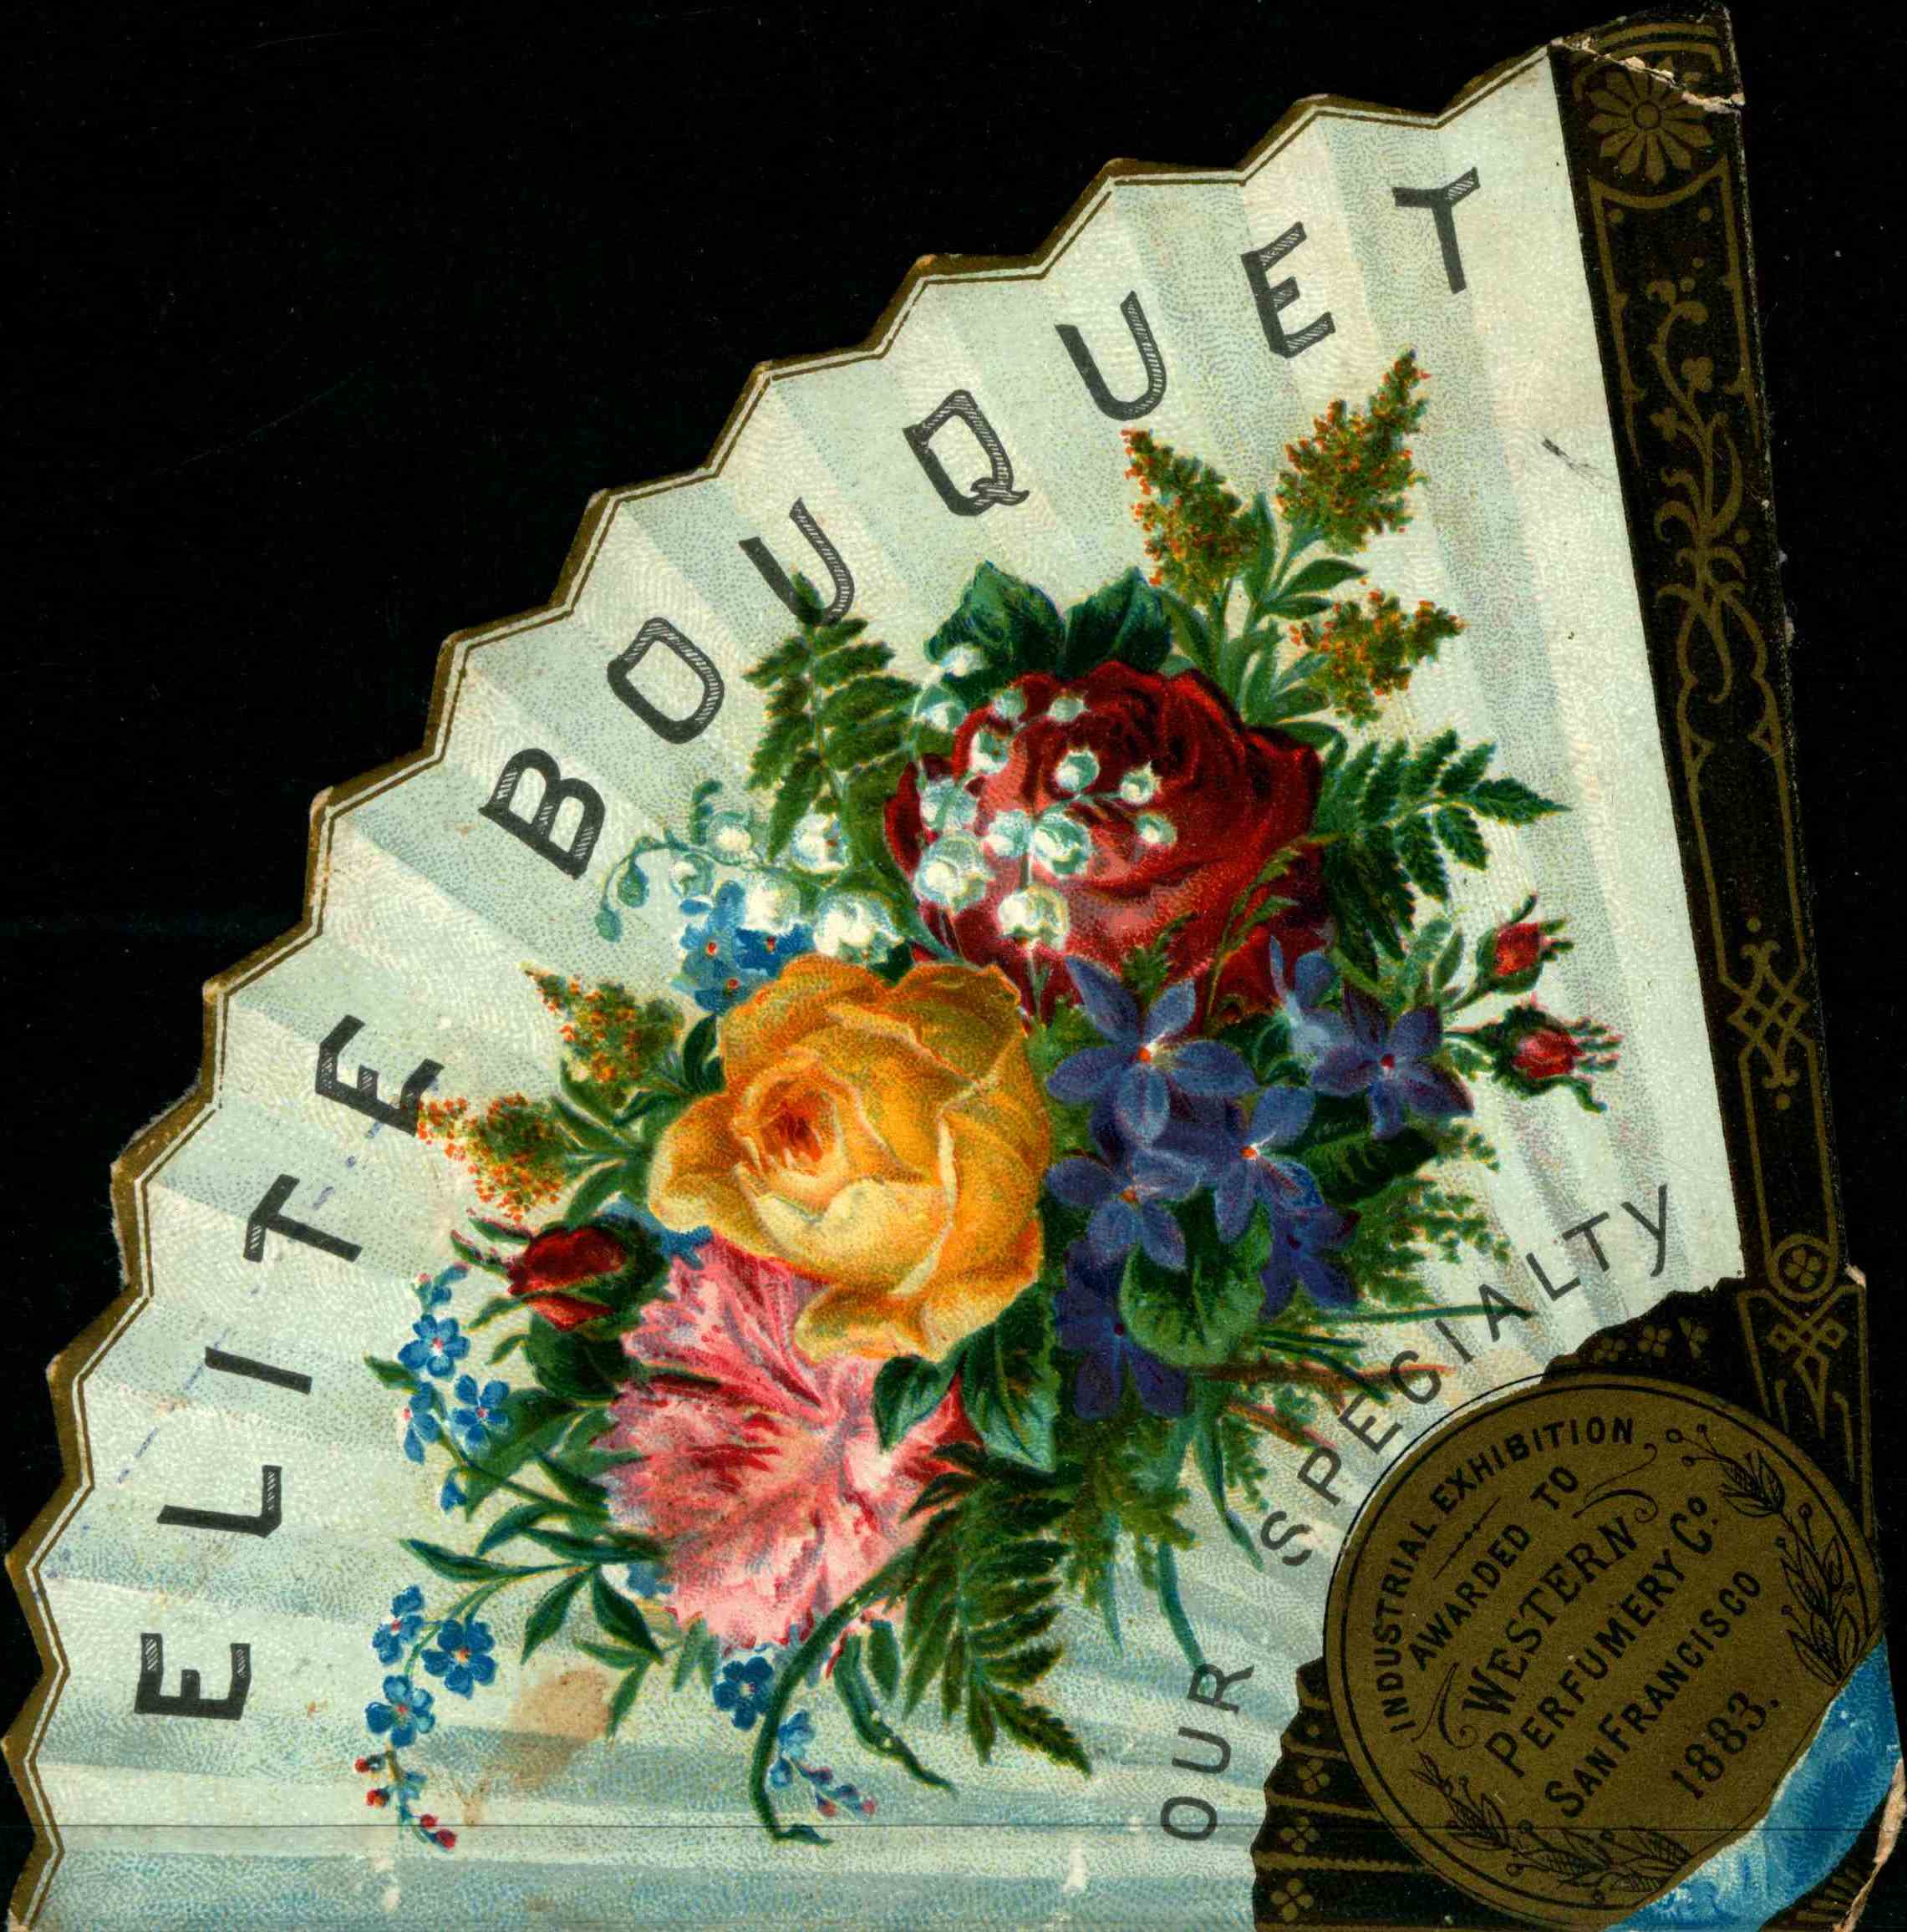 Trade card shaped like a fan with a bouquet of flowers on the front